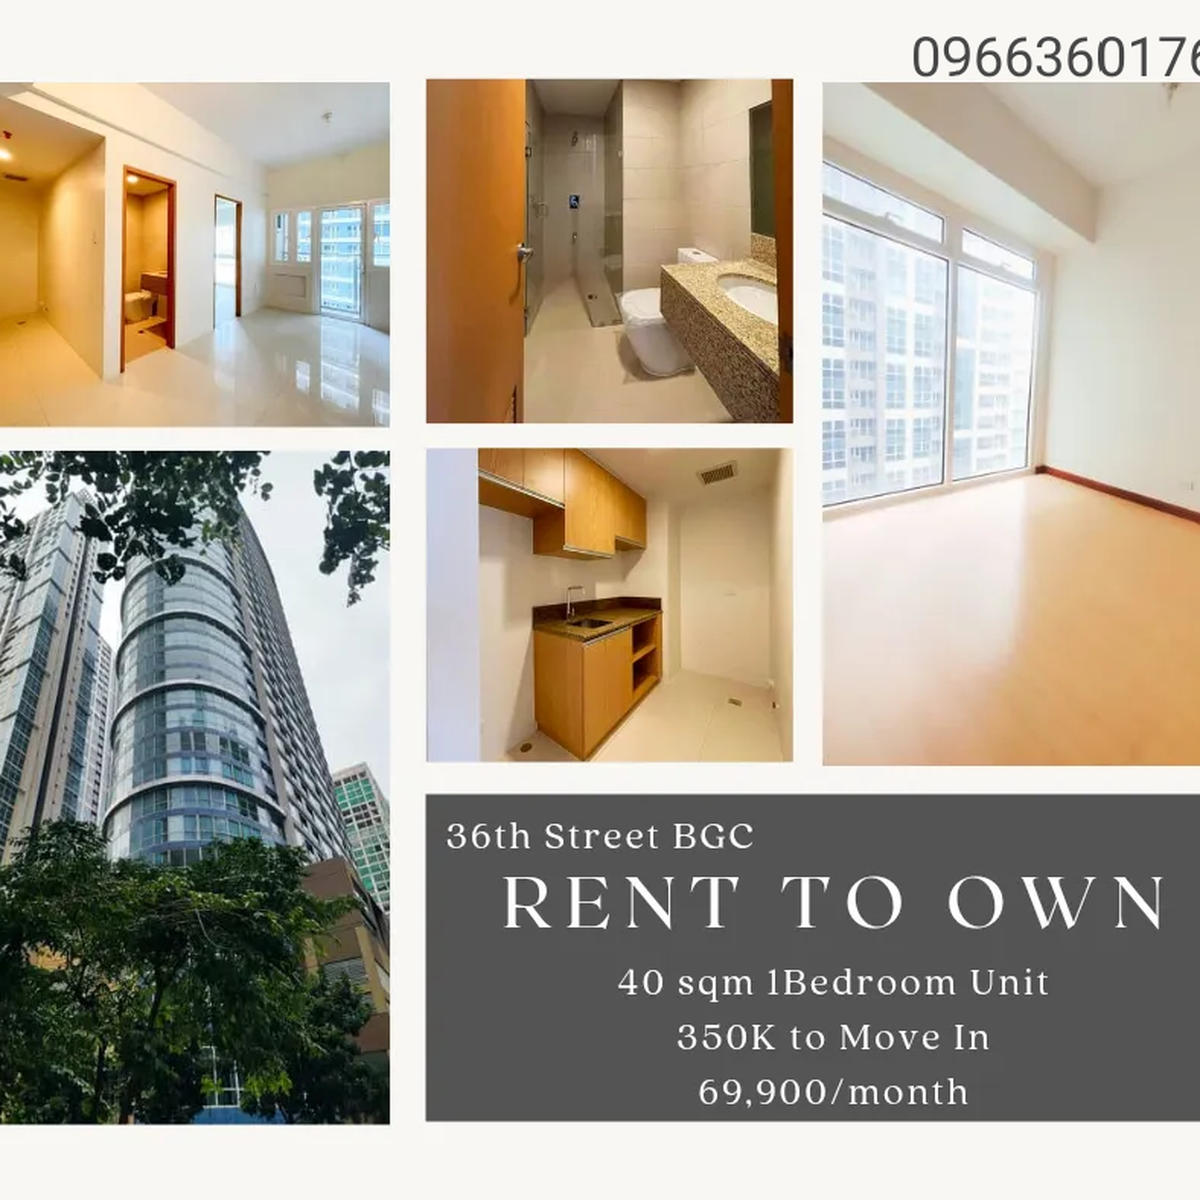 RFO Rent to Own